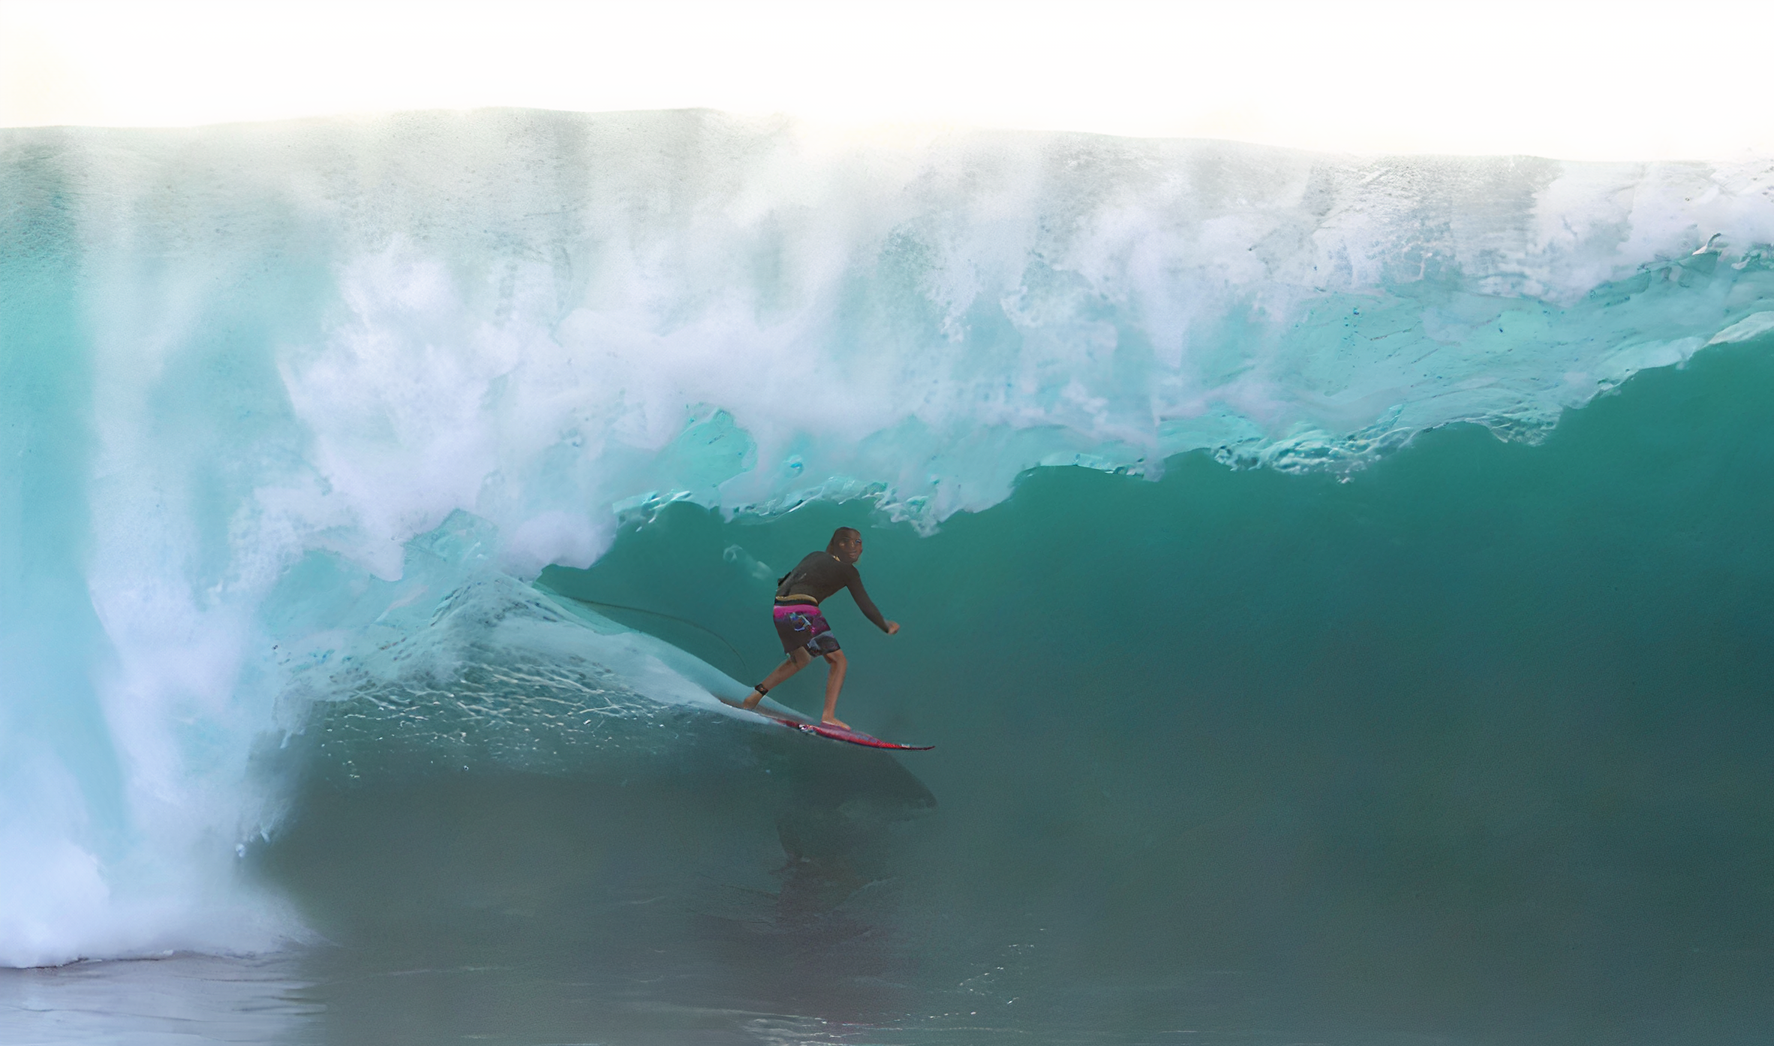 Brute Force Mendia Puts the Pow in Power Surfing